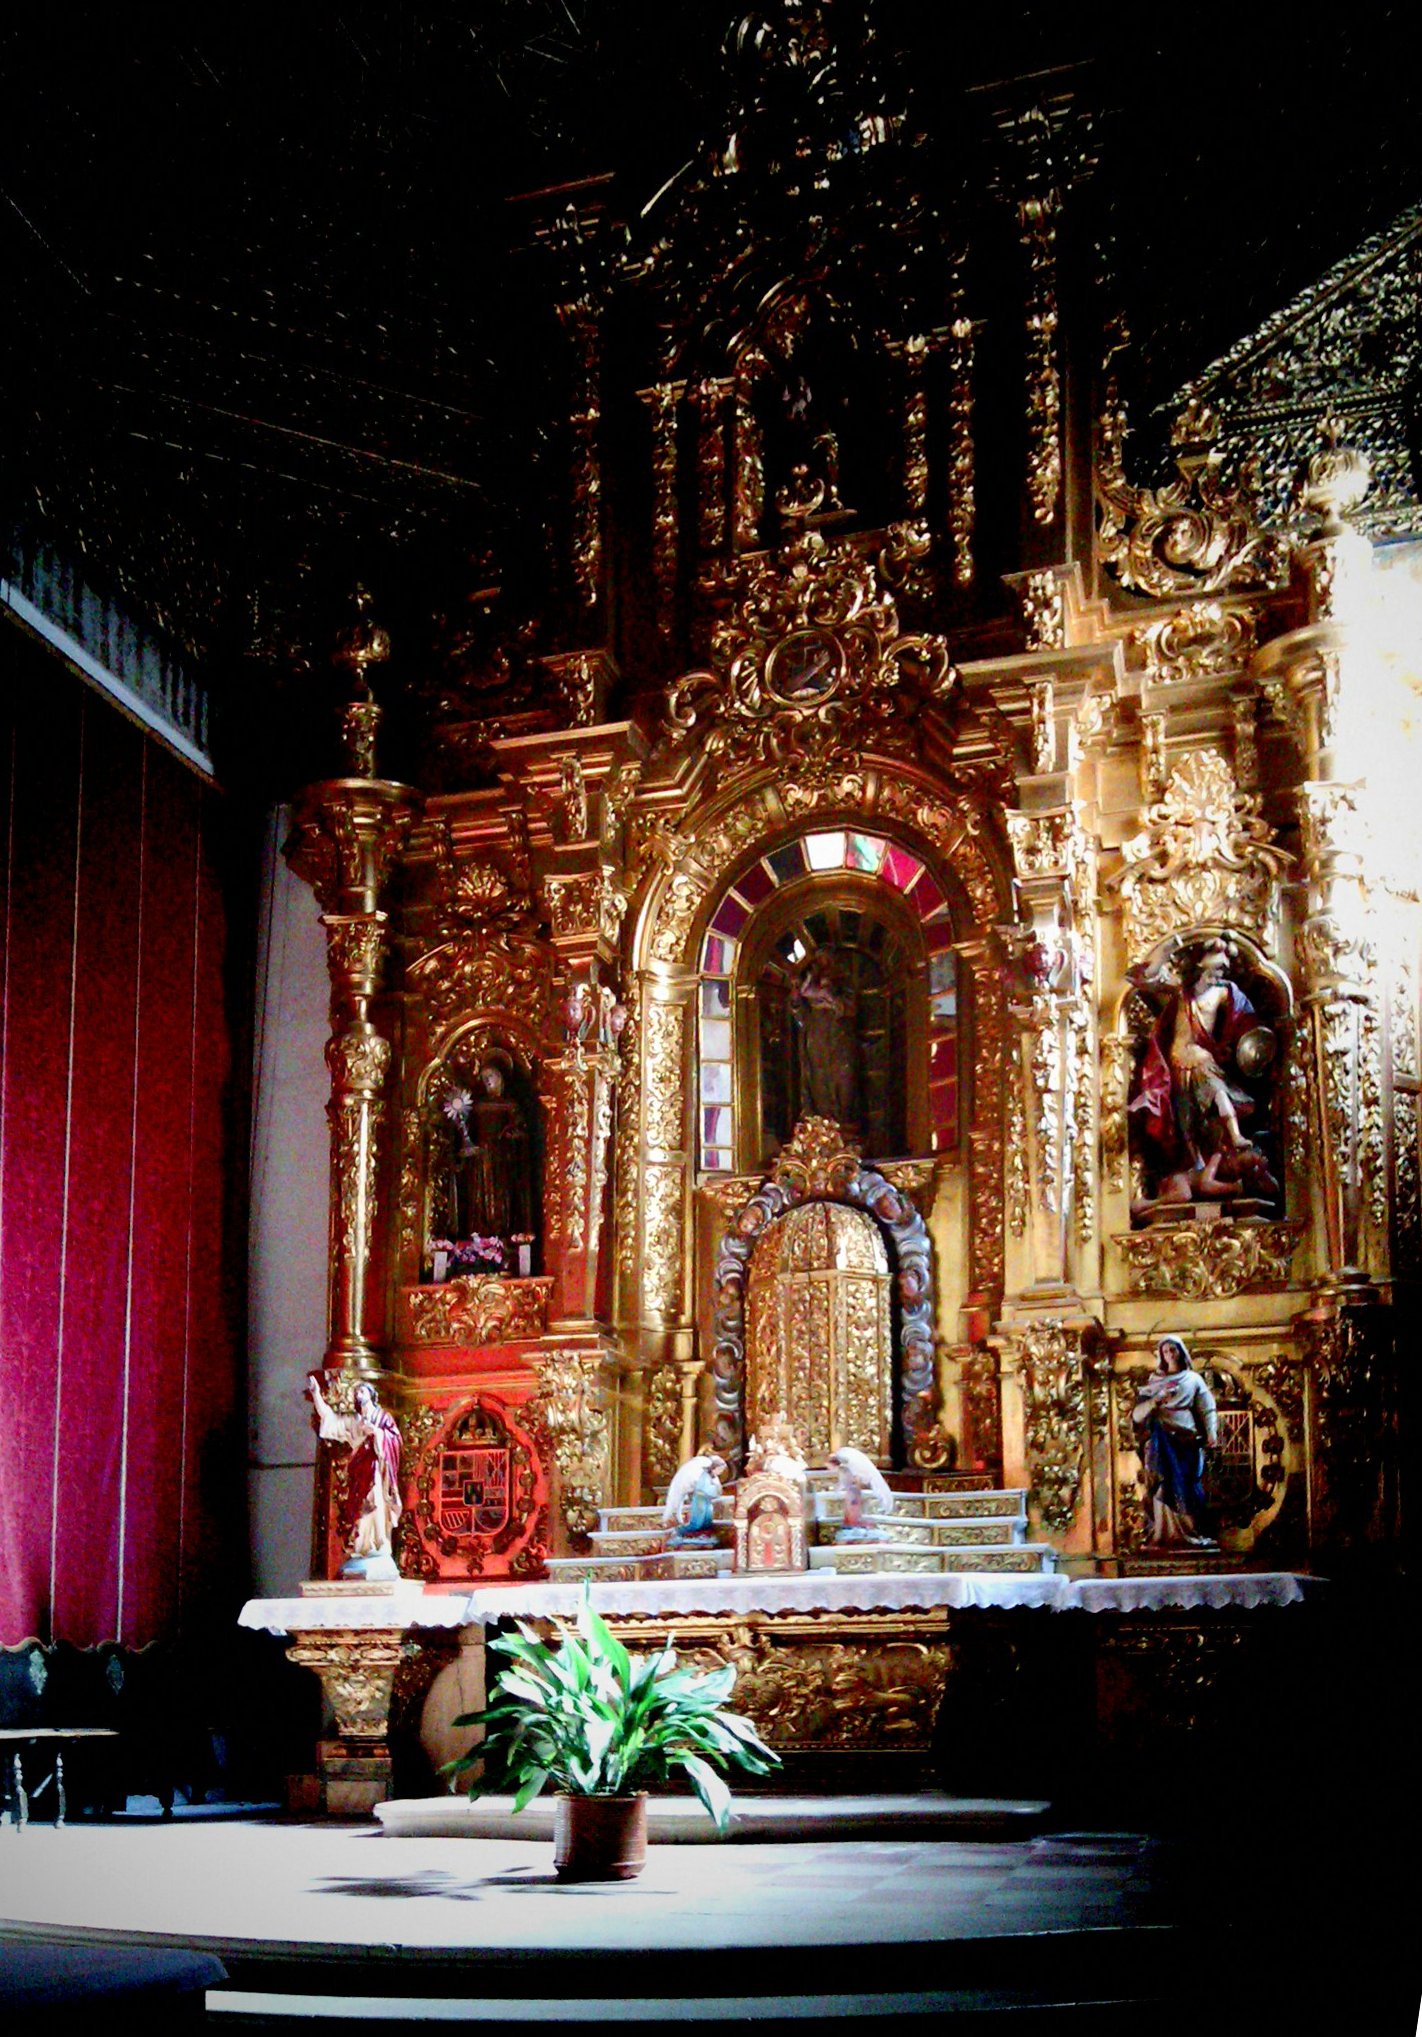 an elaborate gold alter in front of a stage with people